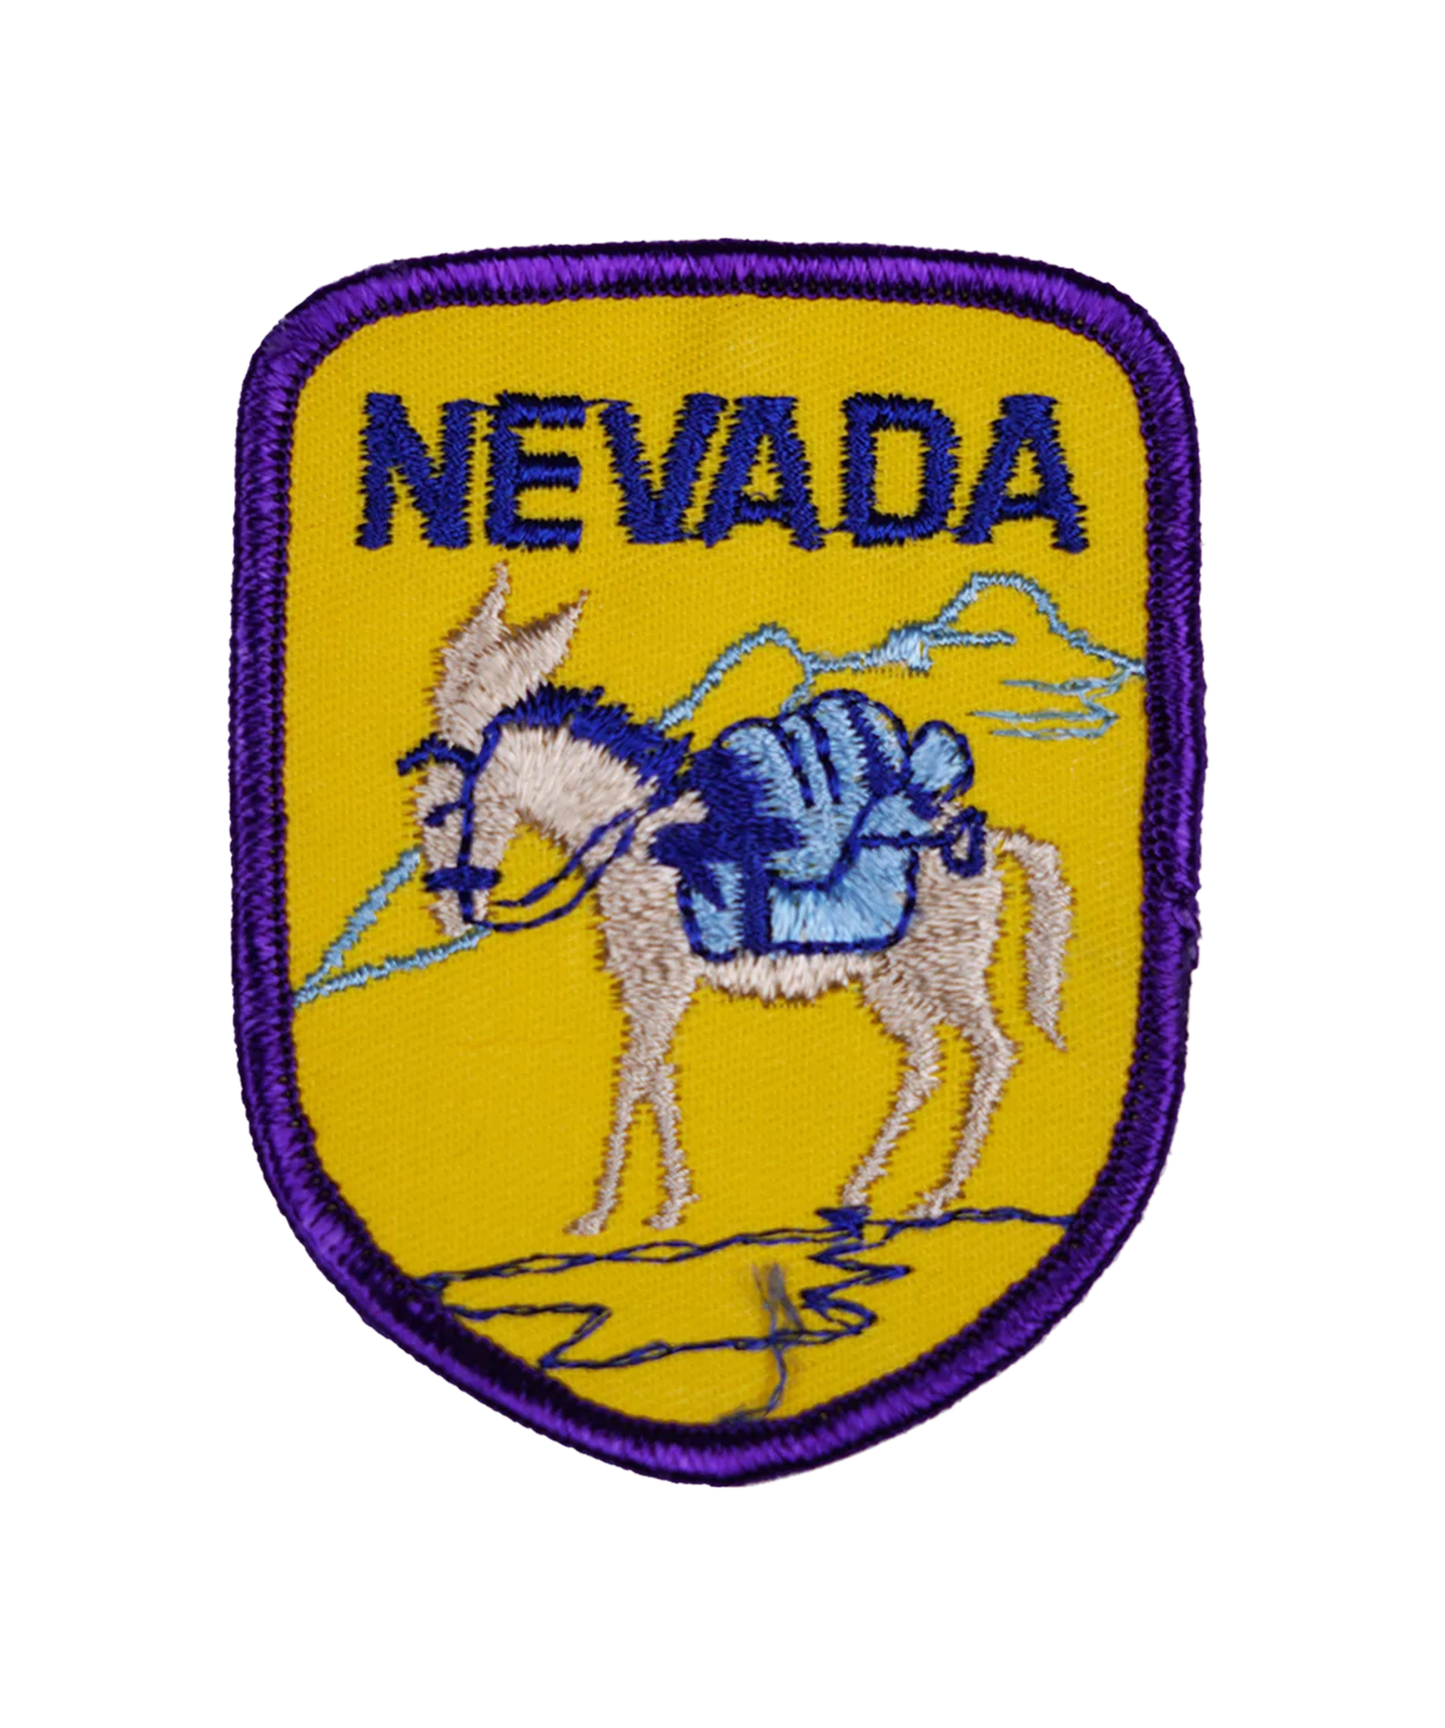 Vintage Nevada Embroidered Patch